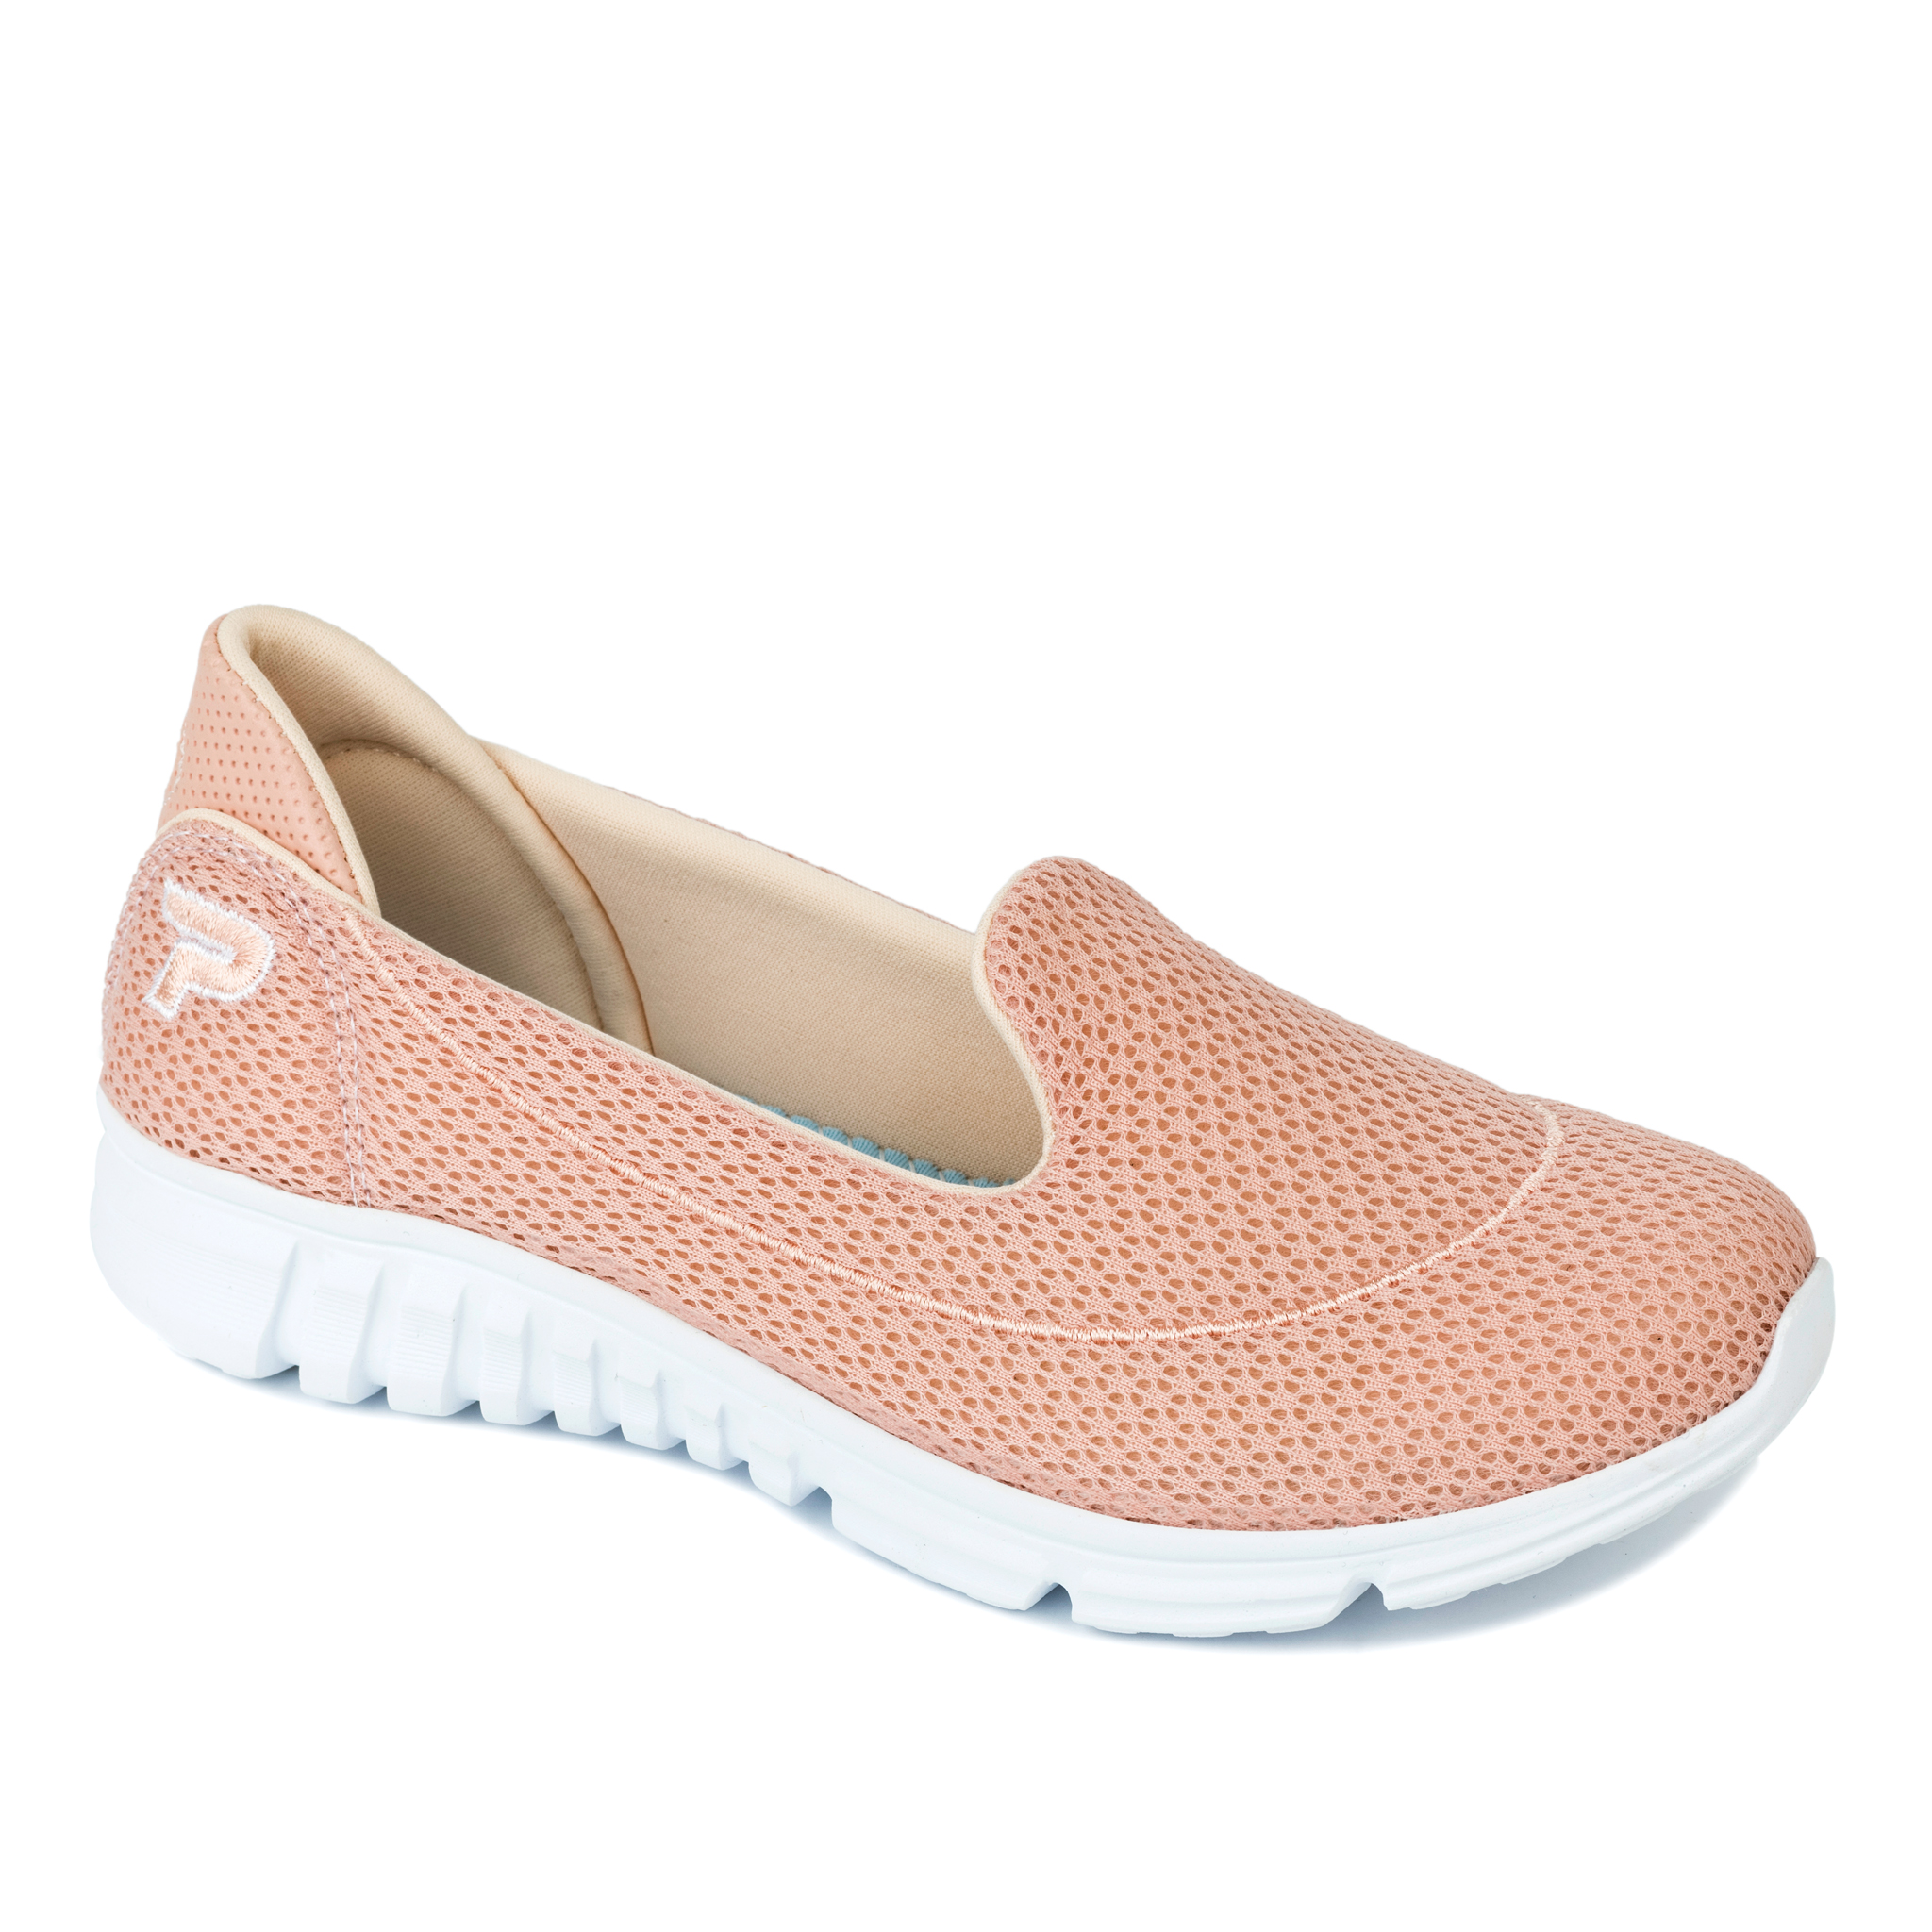 SHALLOW PULL ON SNEAKERS - ROSE